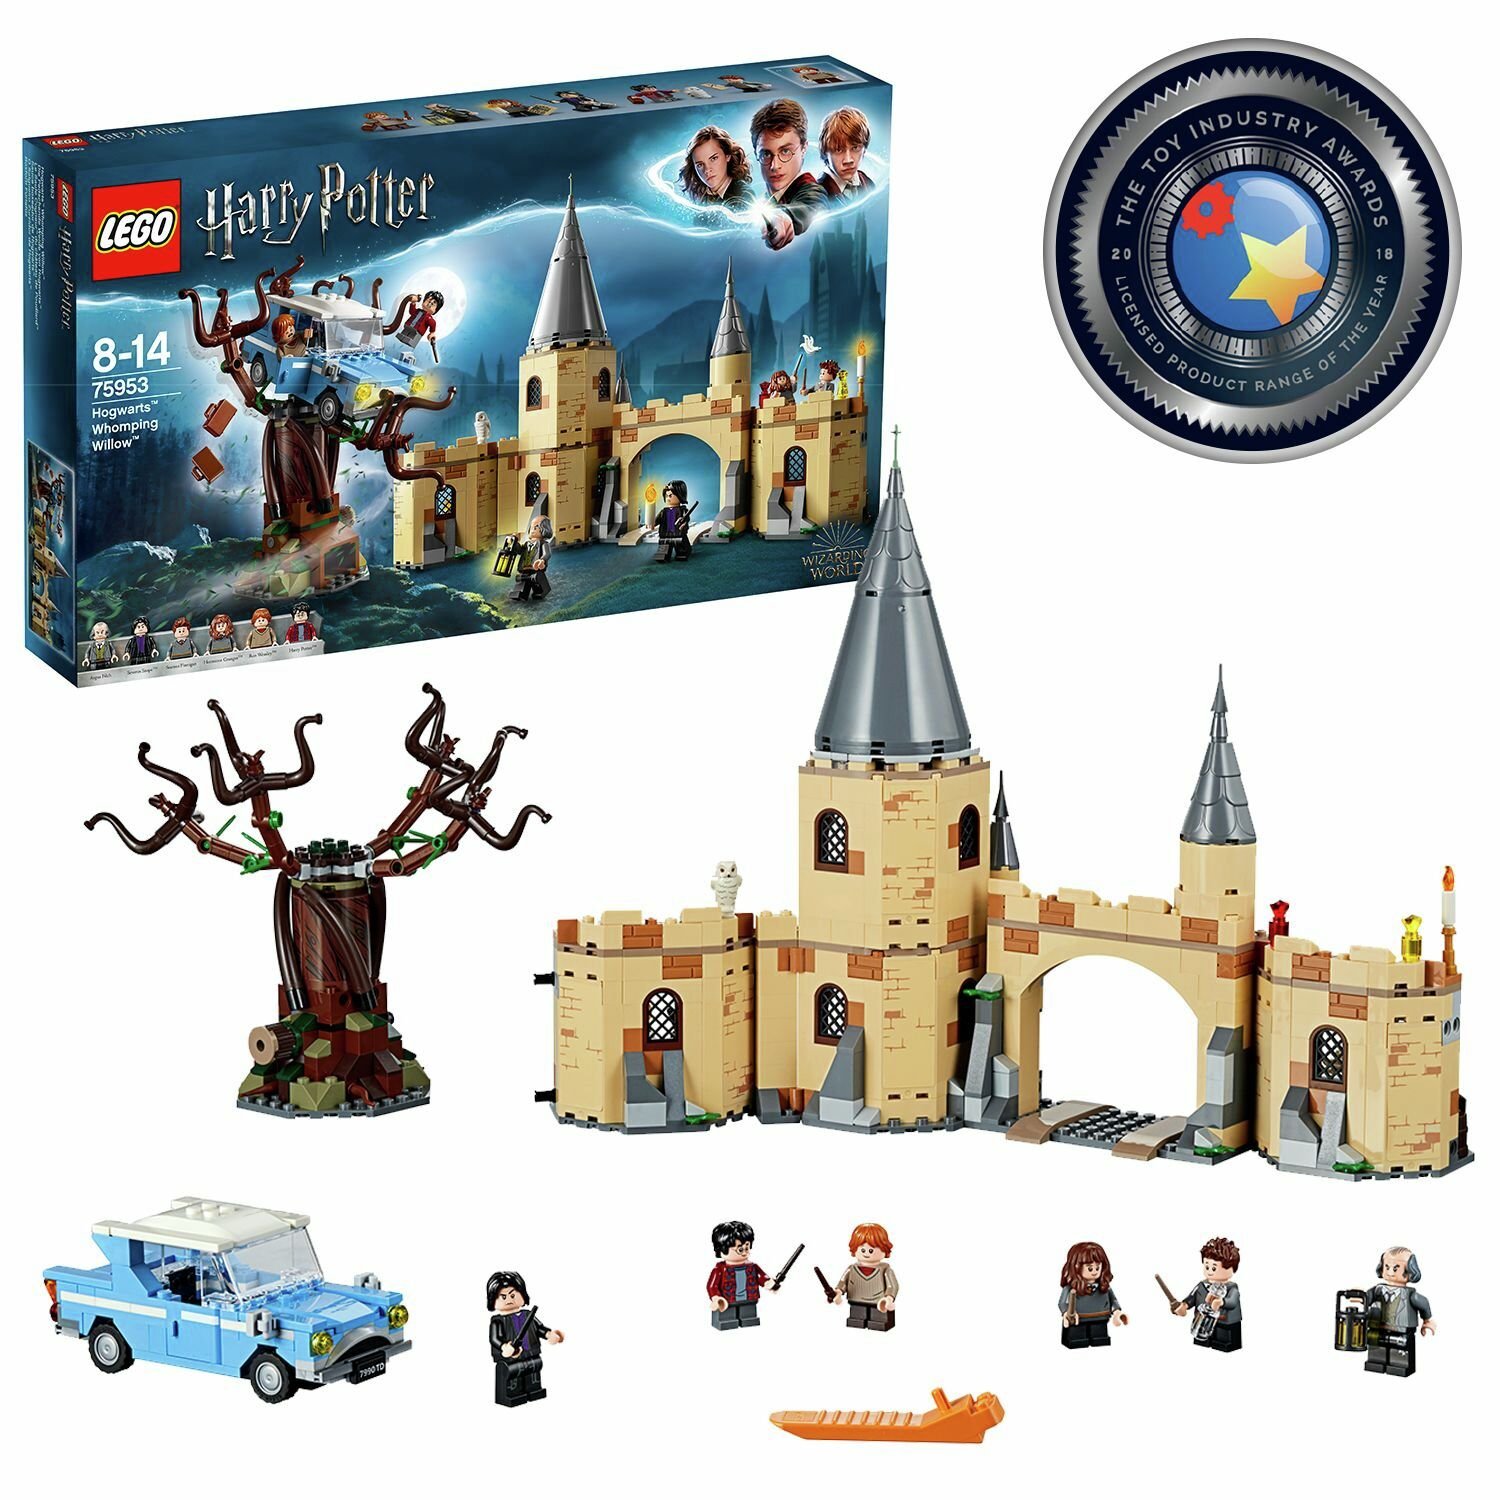 LEGO Harry Potter Hogwarts Whomping Willow Toy Review